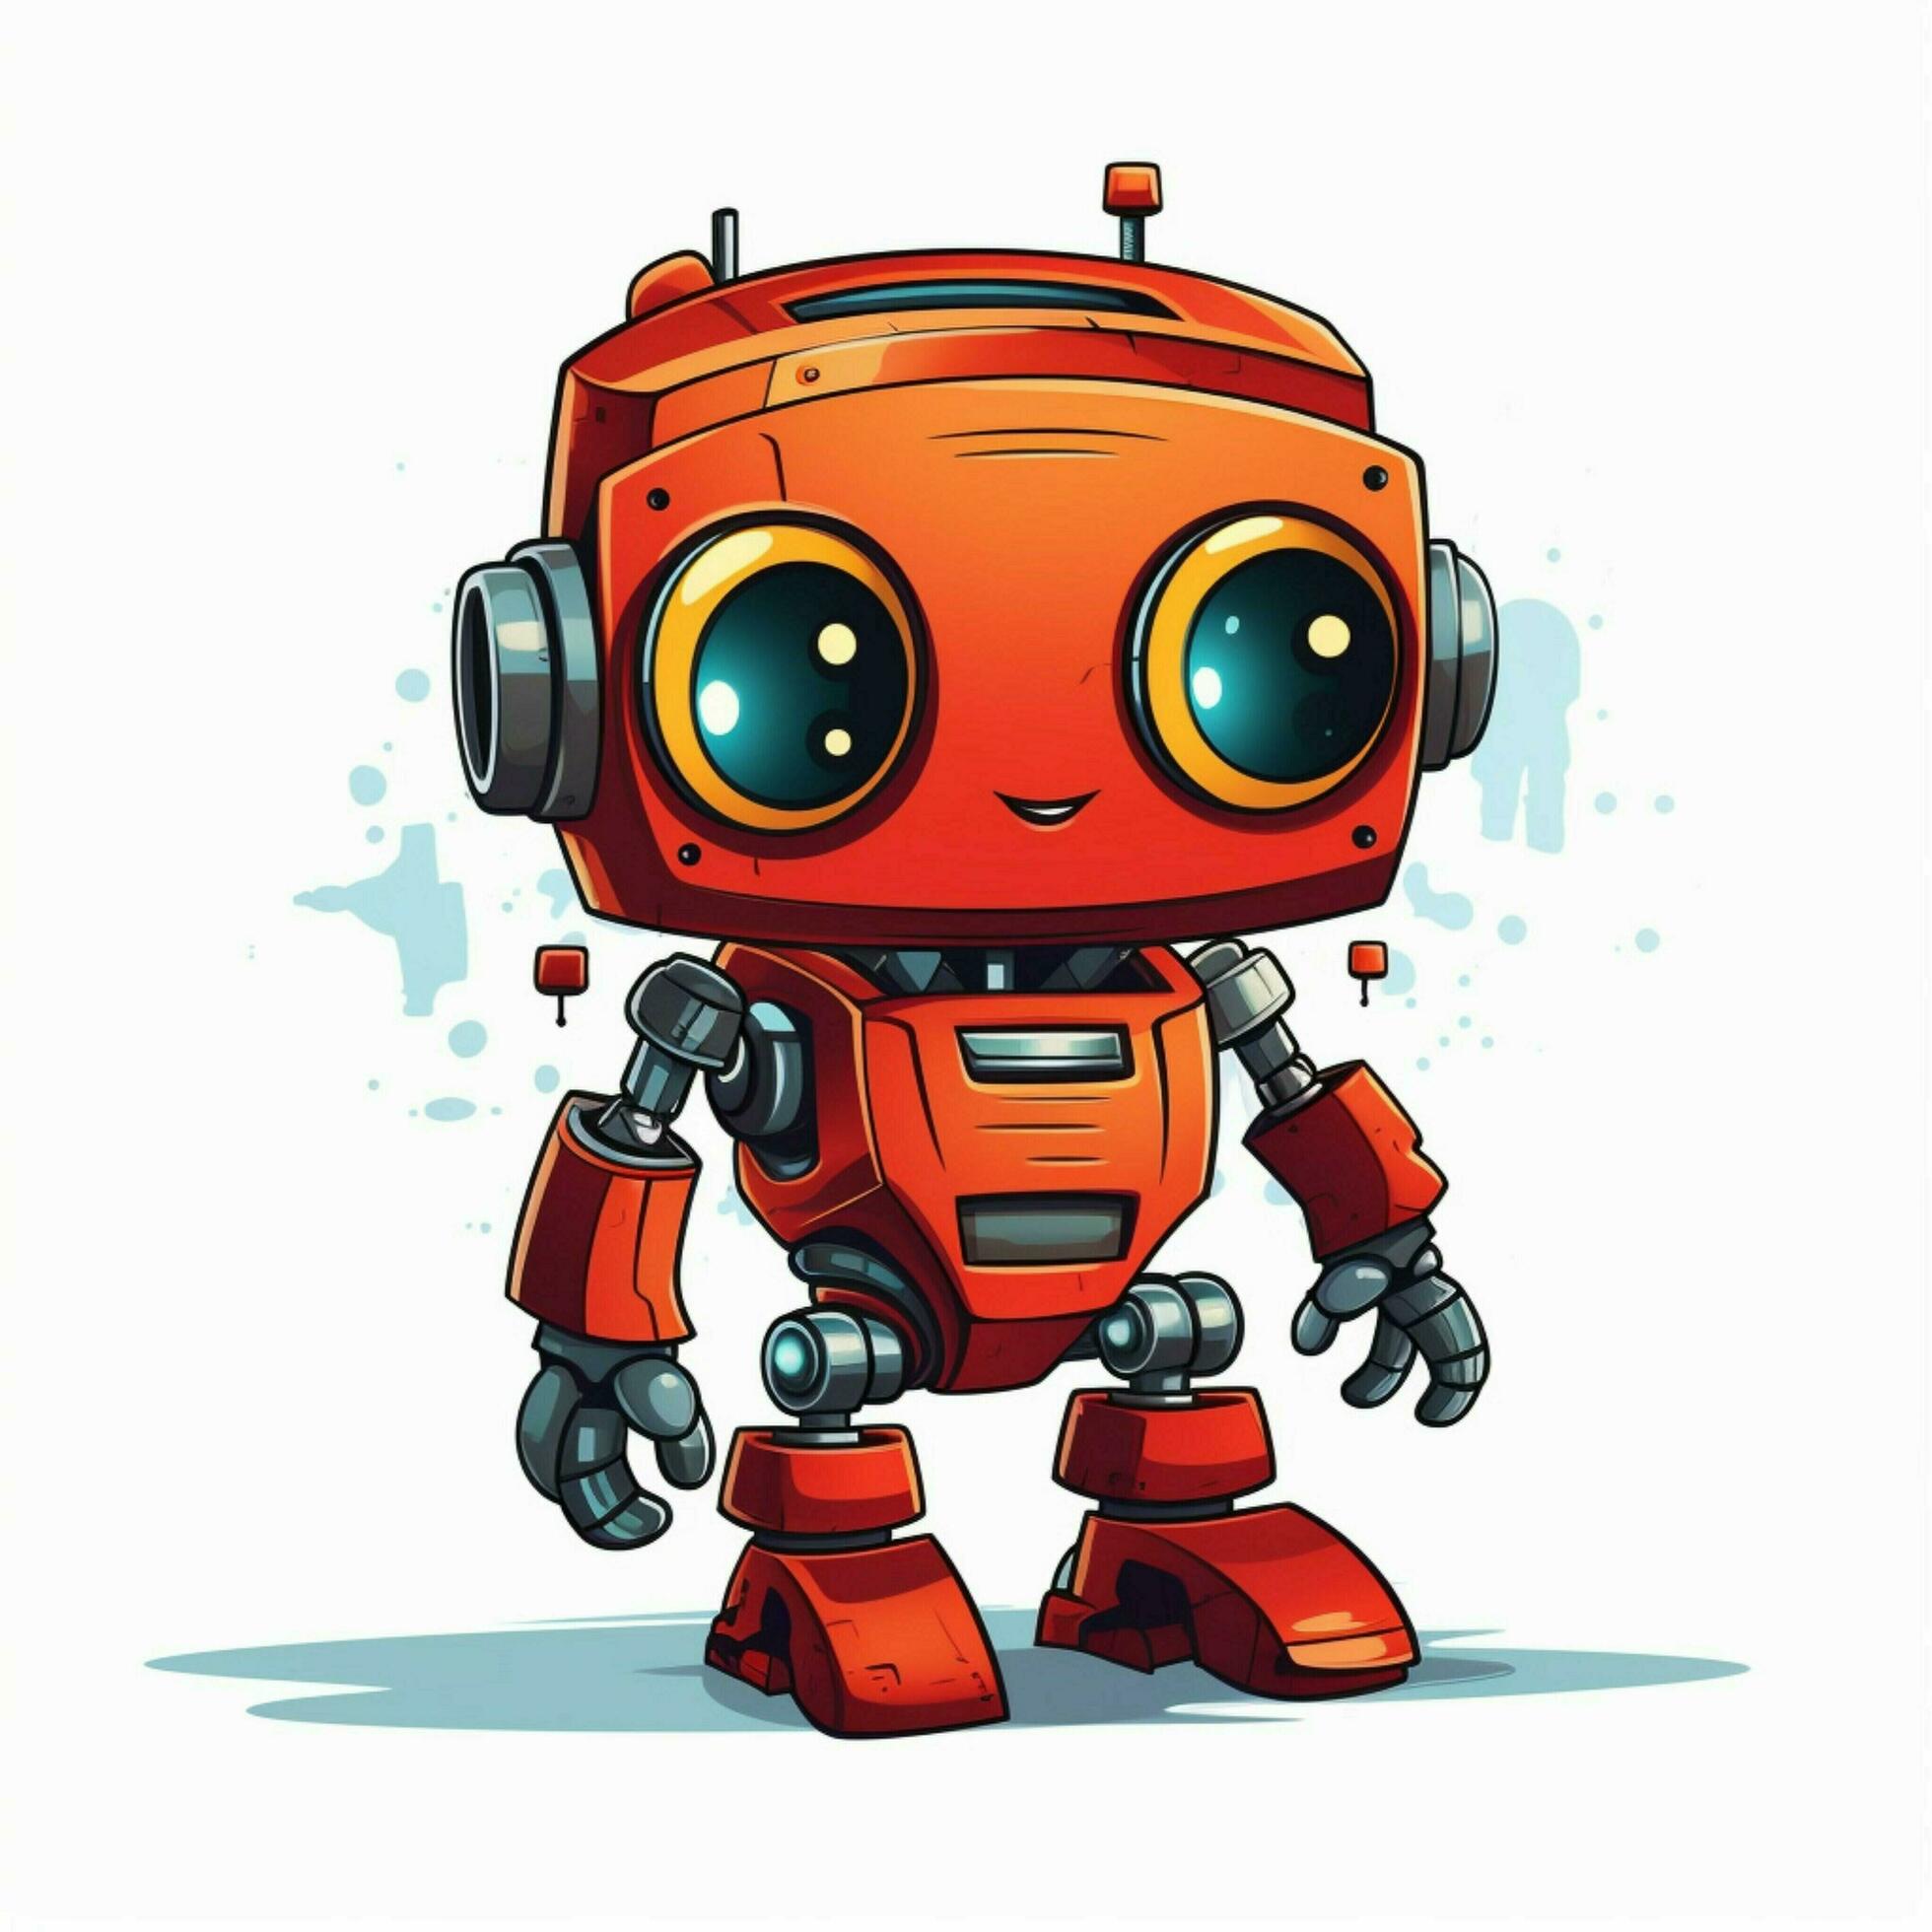 https://static.vecteezy.com/system/resources/previews/030/692/095/large_2x/robot-kit-2d-cartoon-illustraton-on-white-background-high-free-photo.jpg